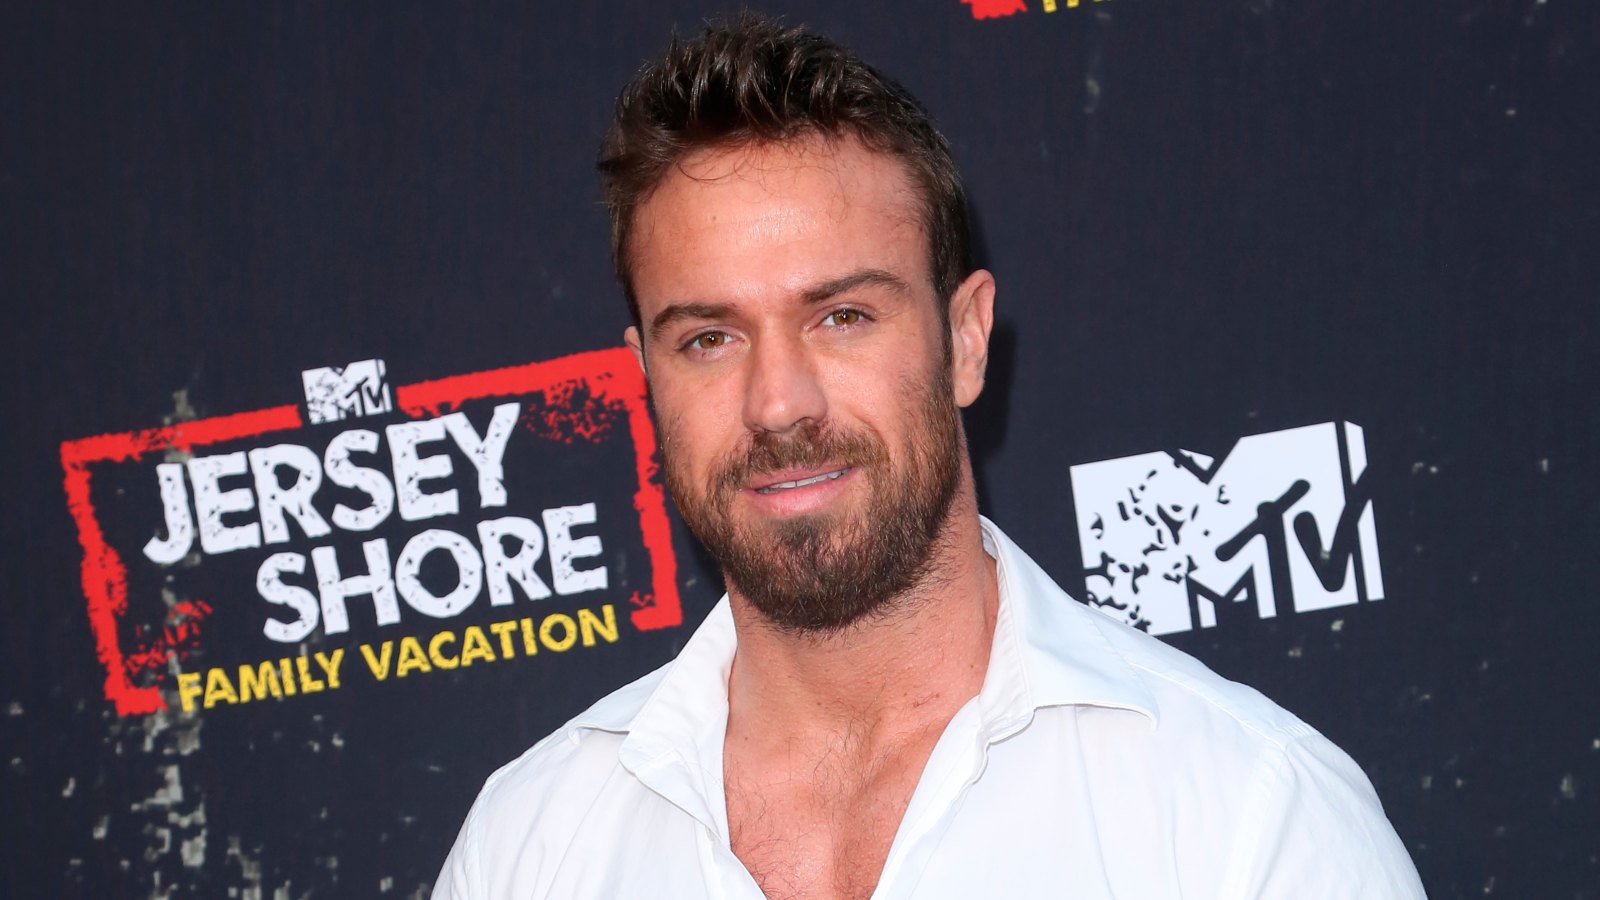 Bachelorette’s Chad Johnson Faces Up to 6 Years in Prison After Being Charged With Six Misdemeanors in Domestic Violence Case